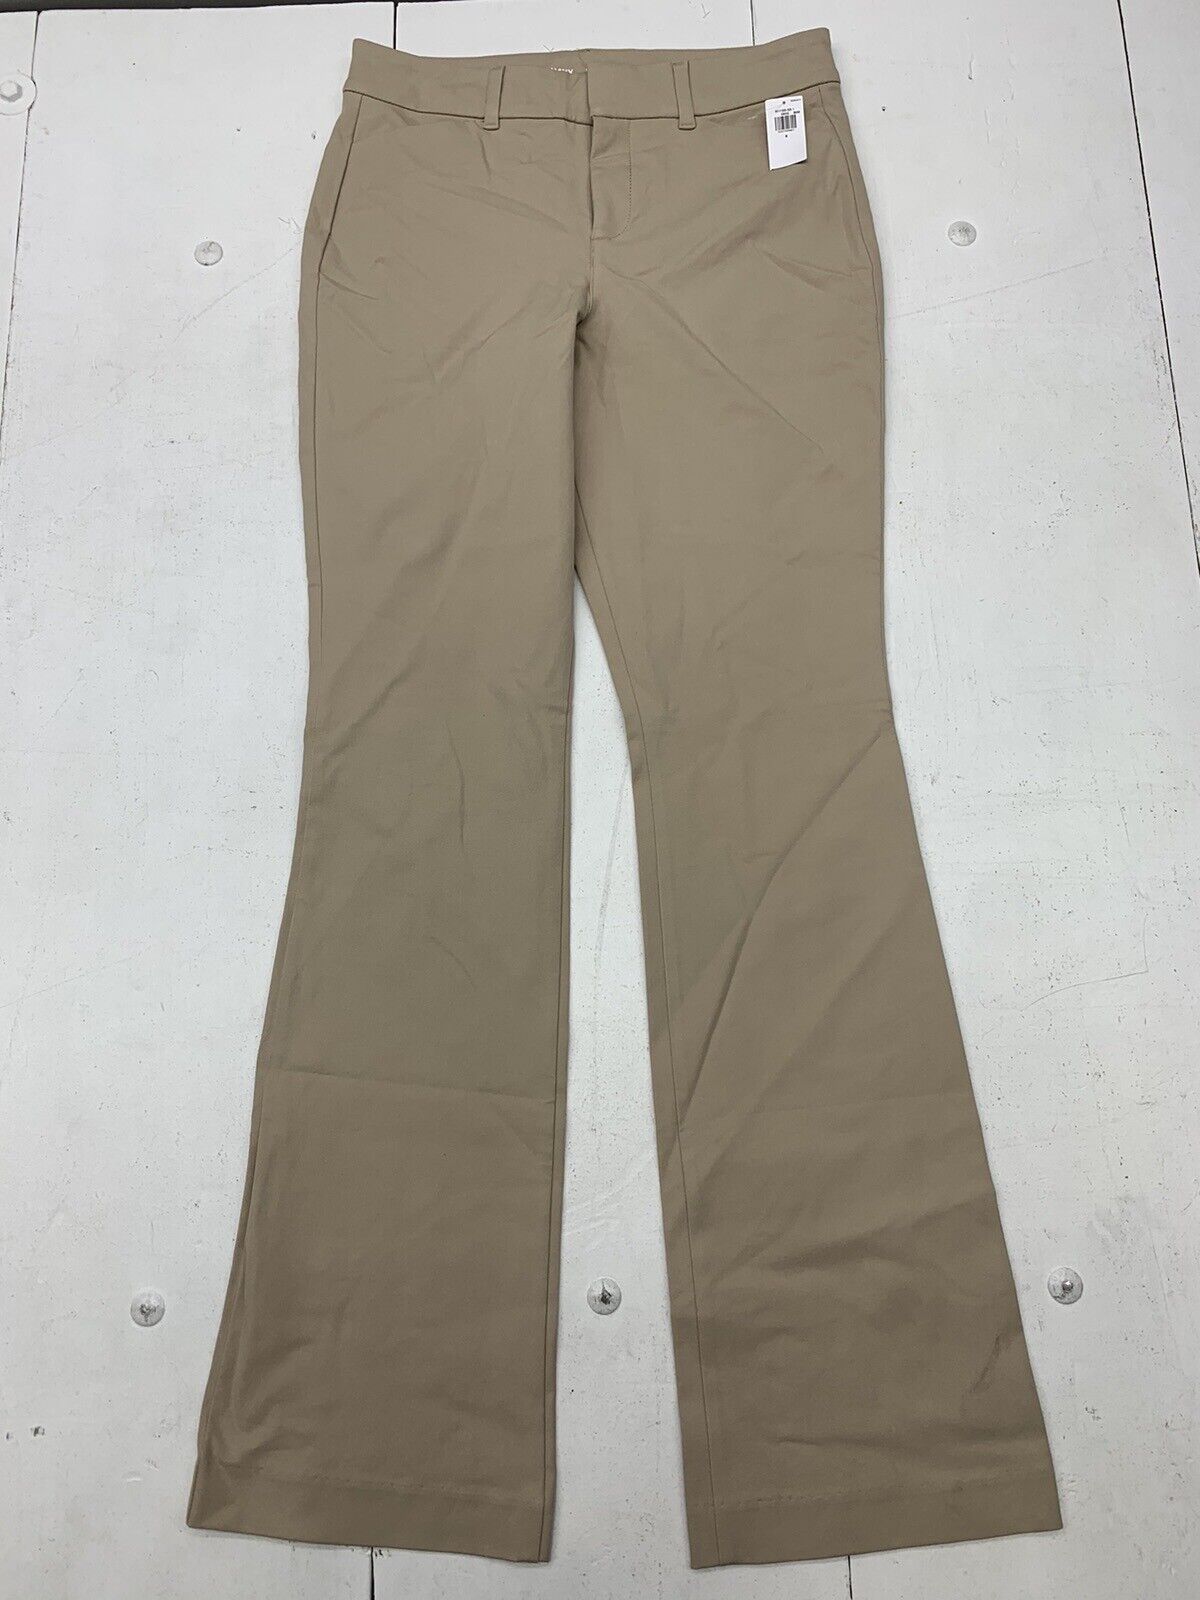 Old Navy Womens Brown High Rise Pixie Flare Pants Size 6 - beyond